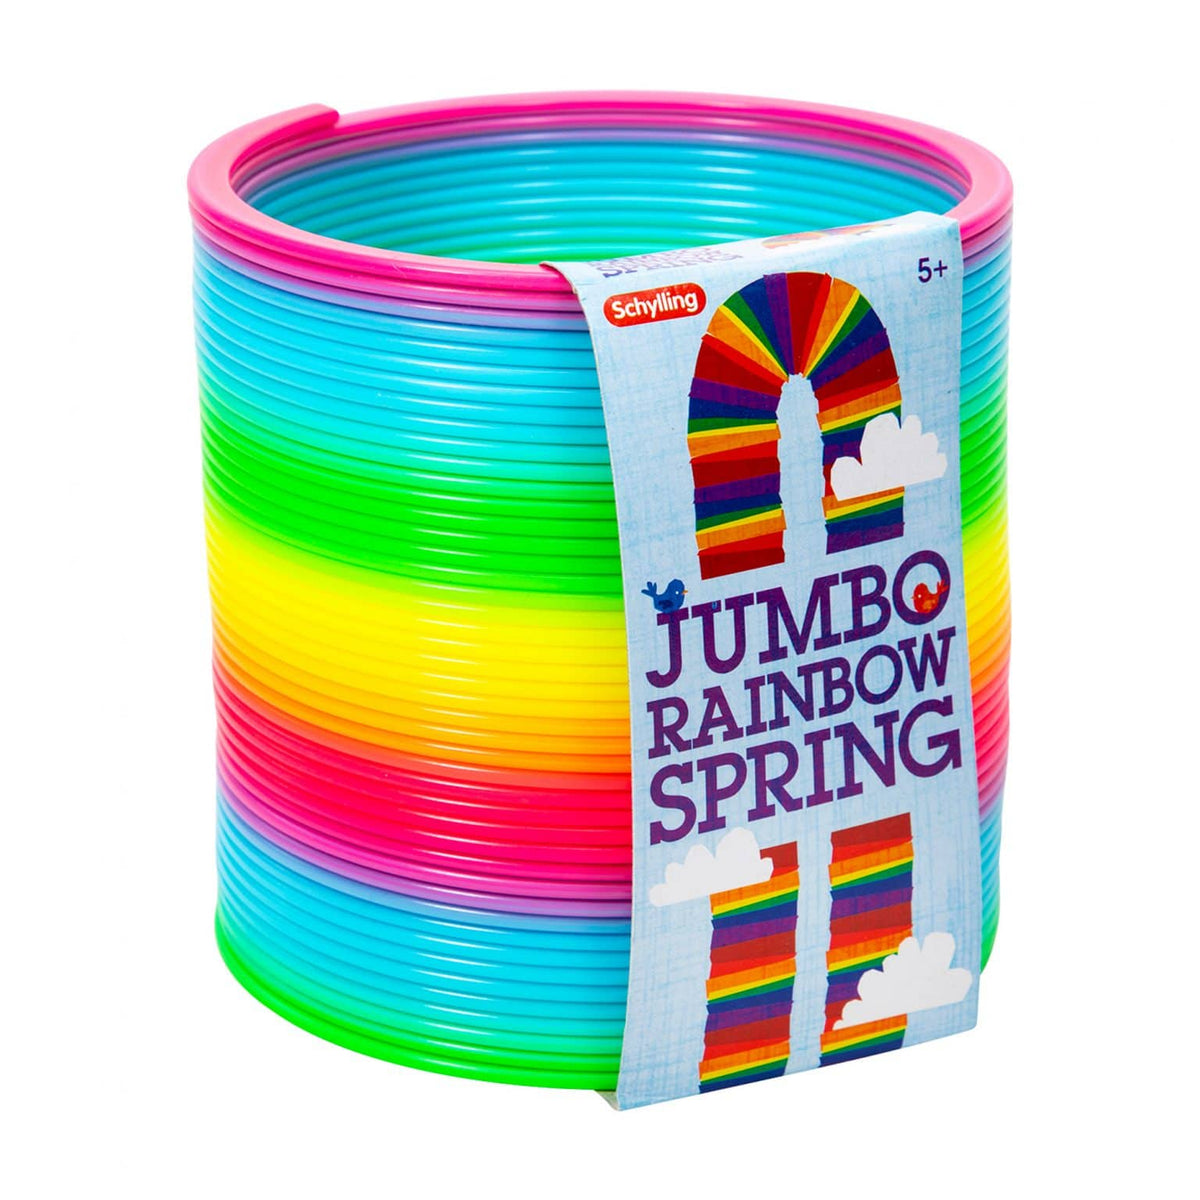 Front slight side view of Jumbo Rainbow Spring in package and upright.